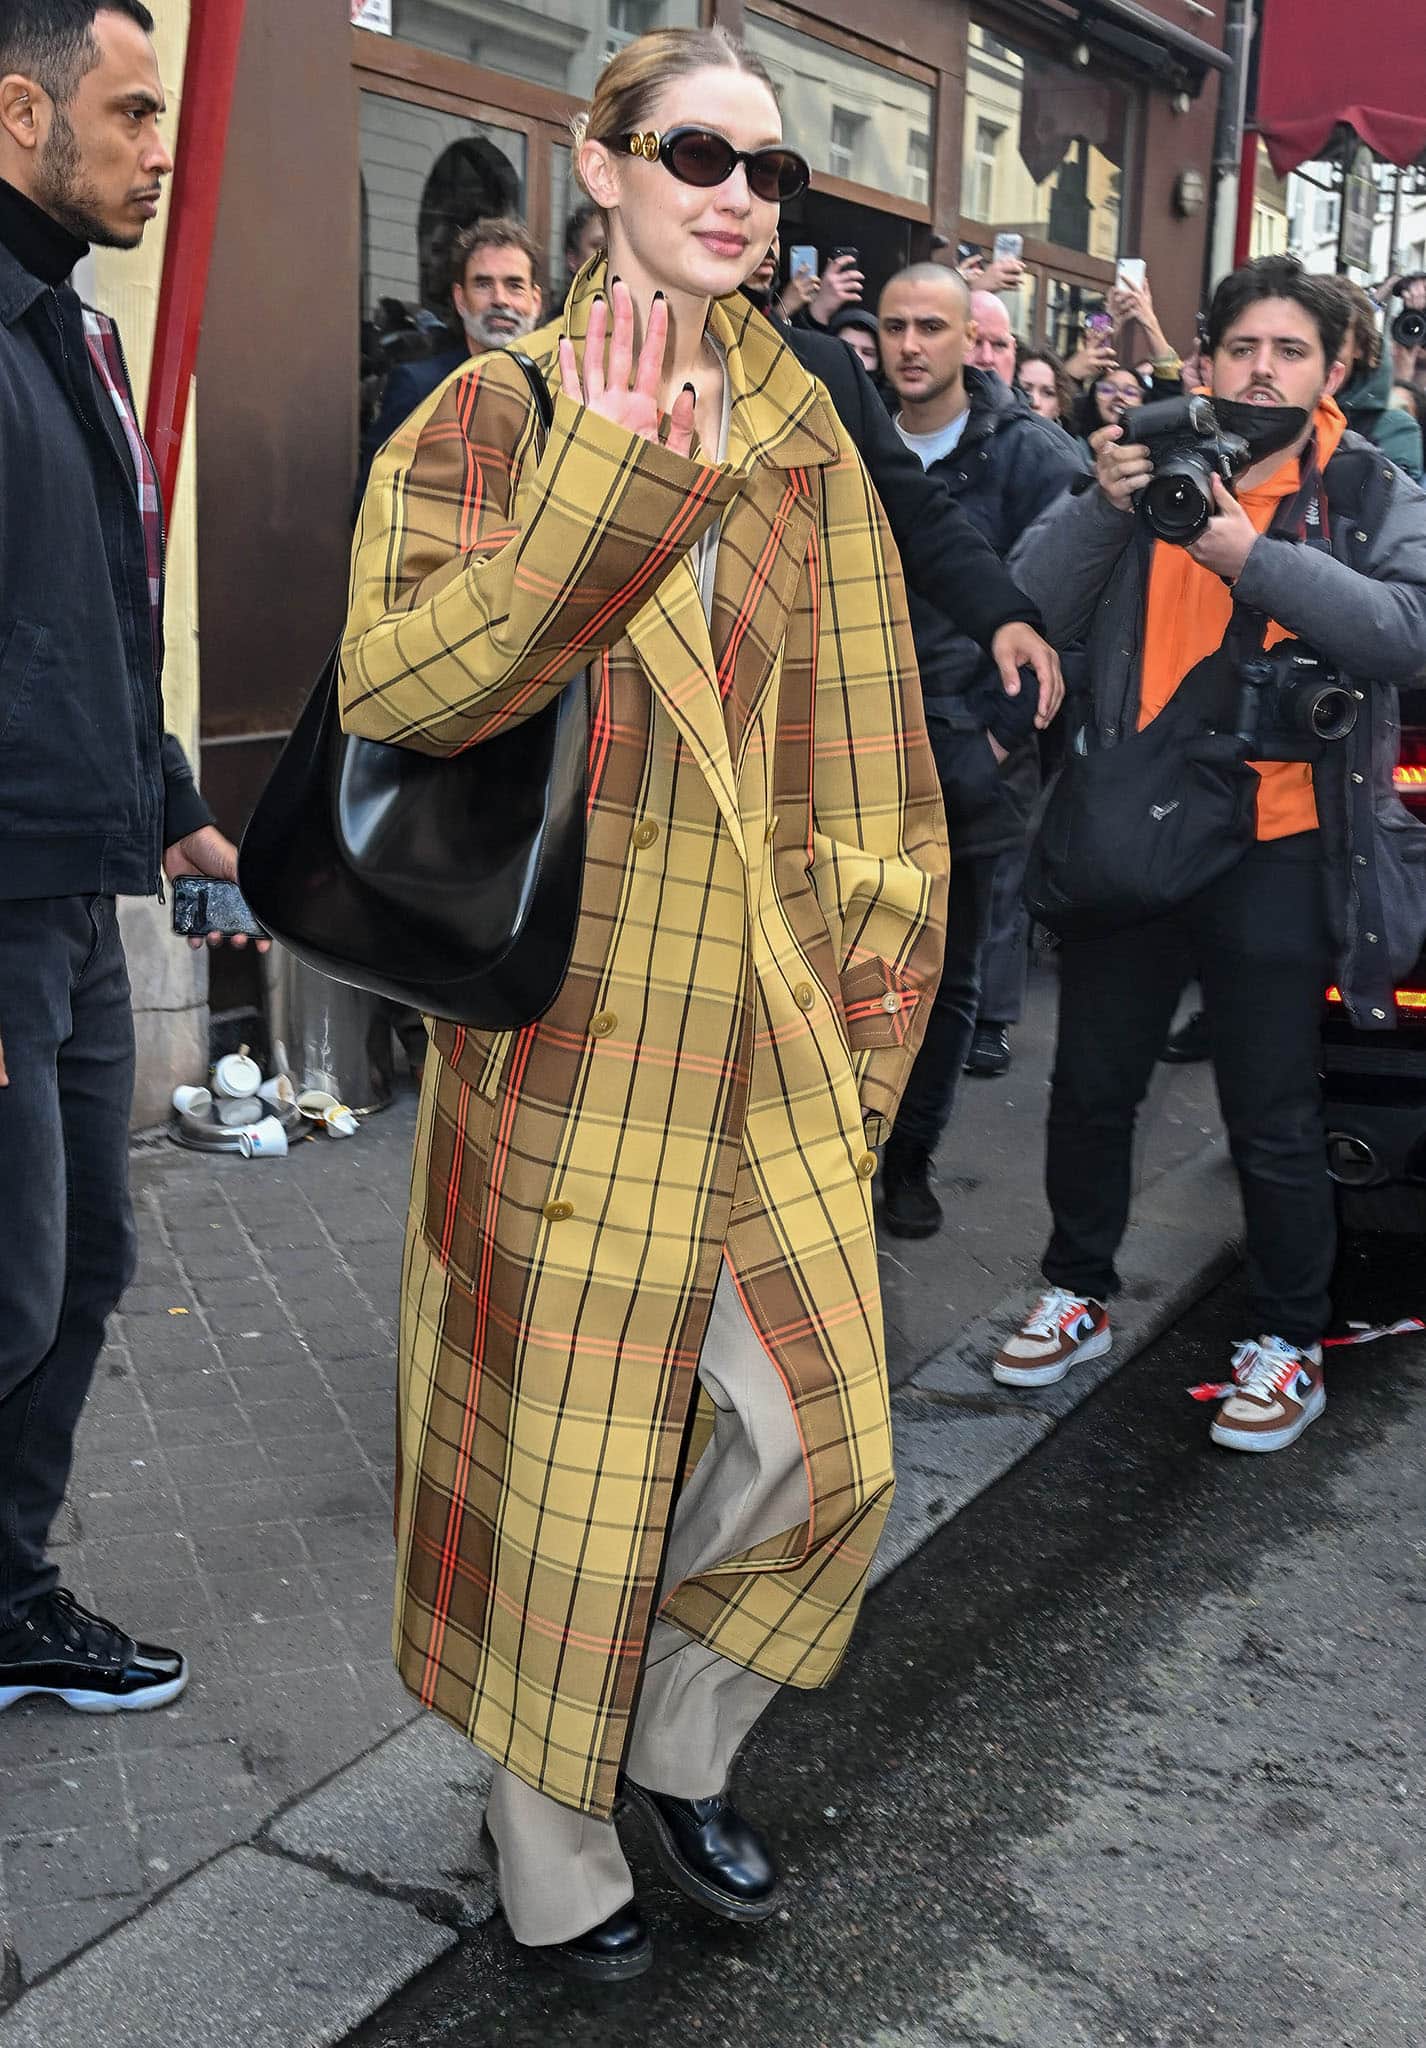 Gigi Hadid wears a yellow tartan trench coat from Vivienne Westwood's Spring 2022 collection outside Nouvelle Eve ahead of the fashion show